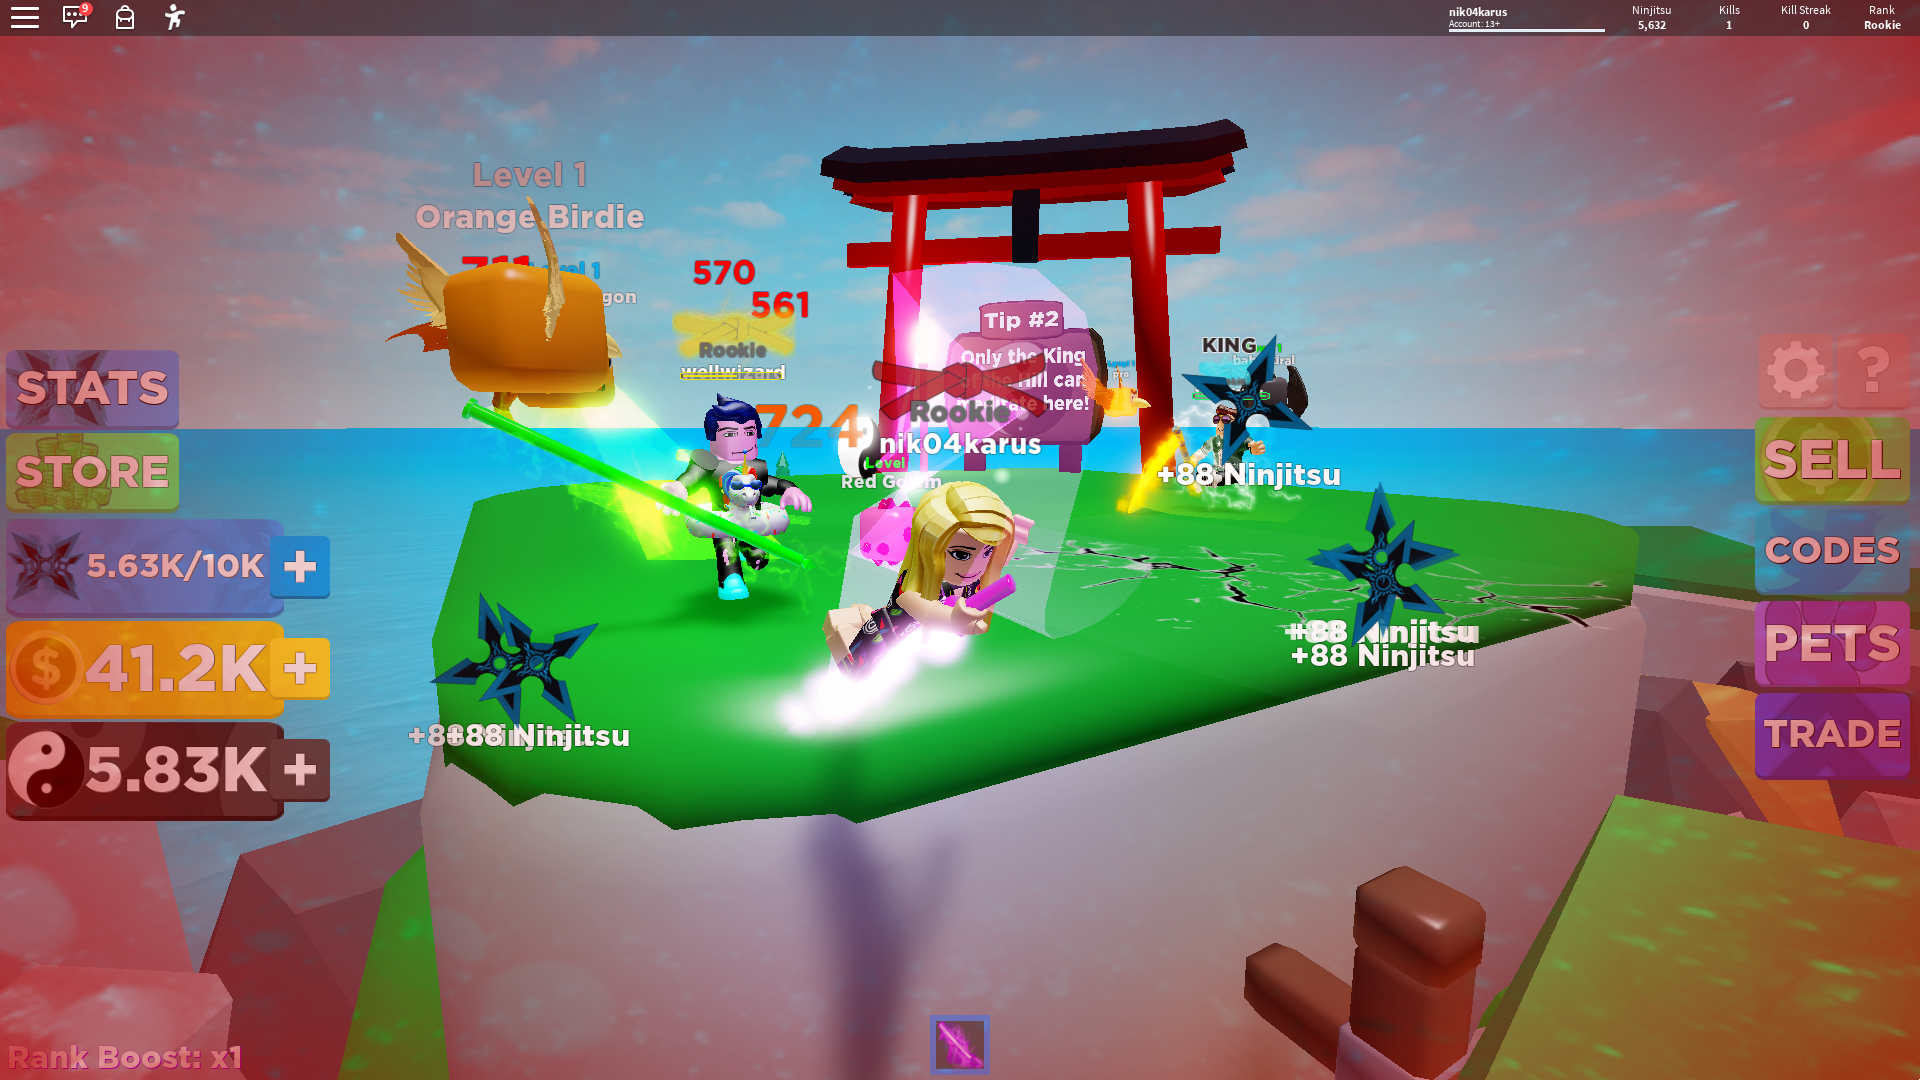 Cheats For Ninja Legends Roblox - roblox lumber tycoon 2 gamelog march 28 2019 free blog directory